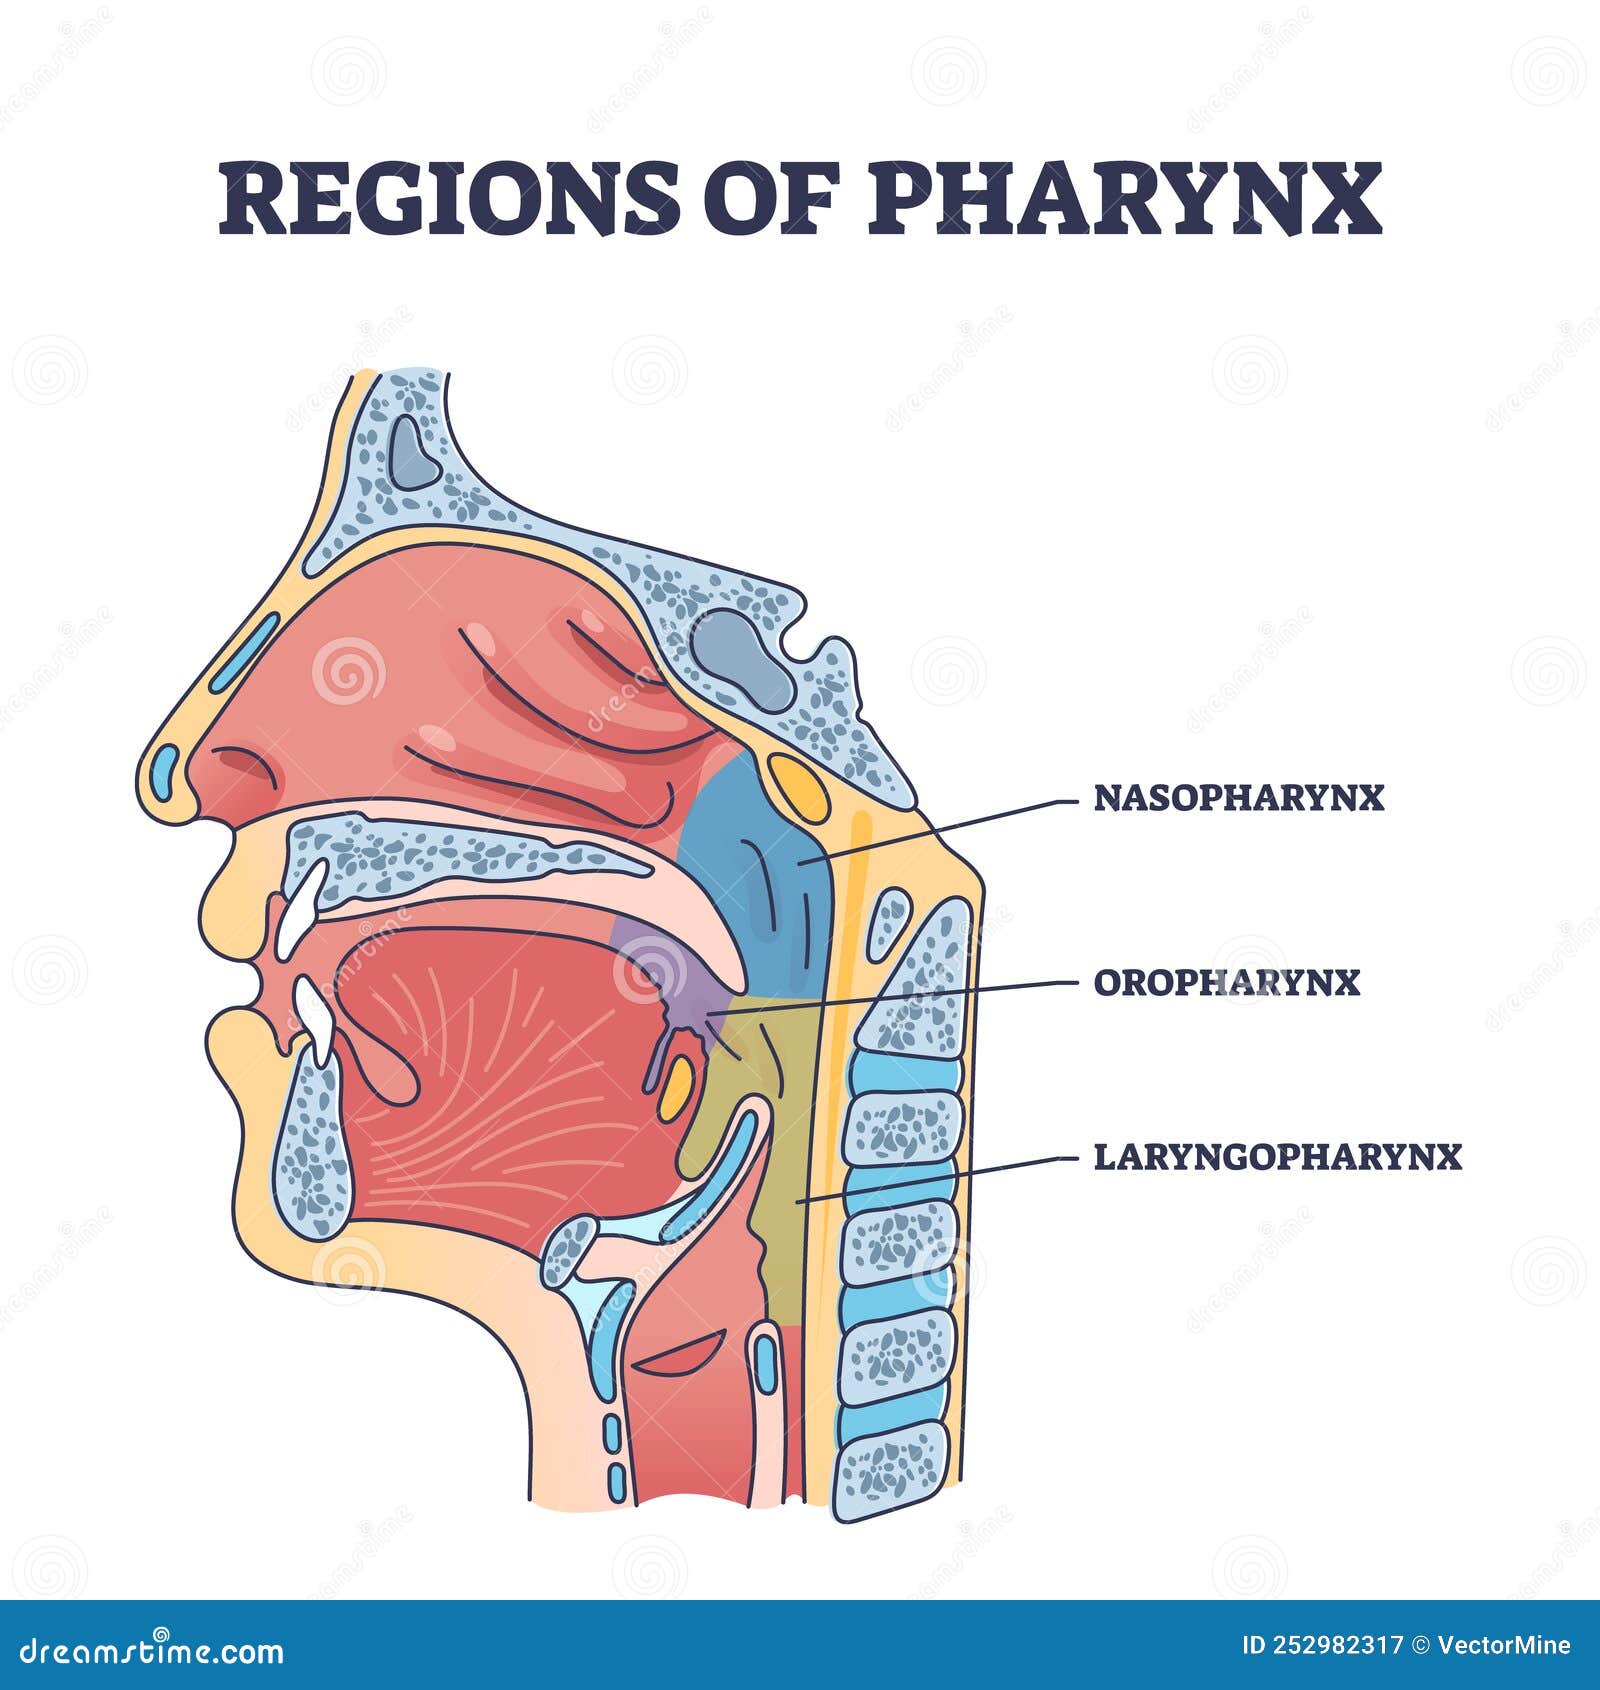 regions of pharynx and throat parts division from side view outline diagram